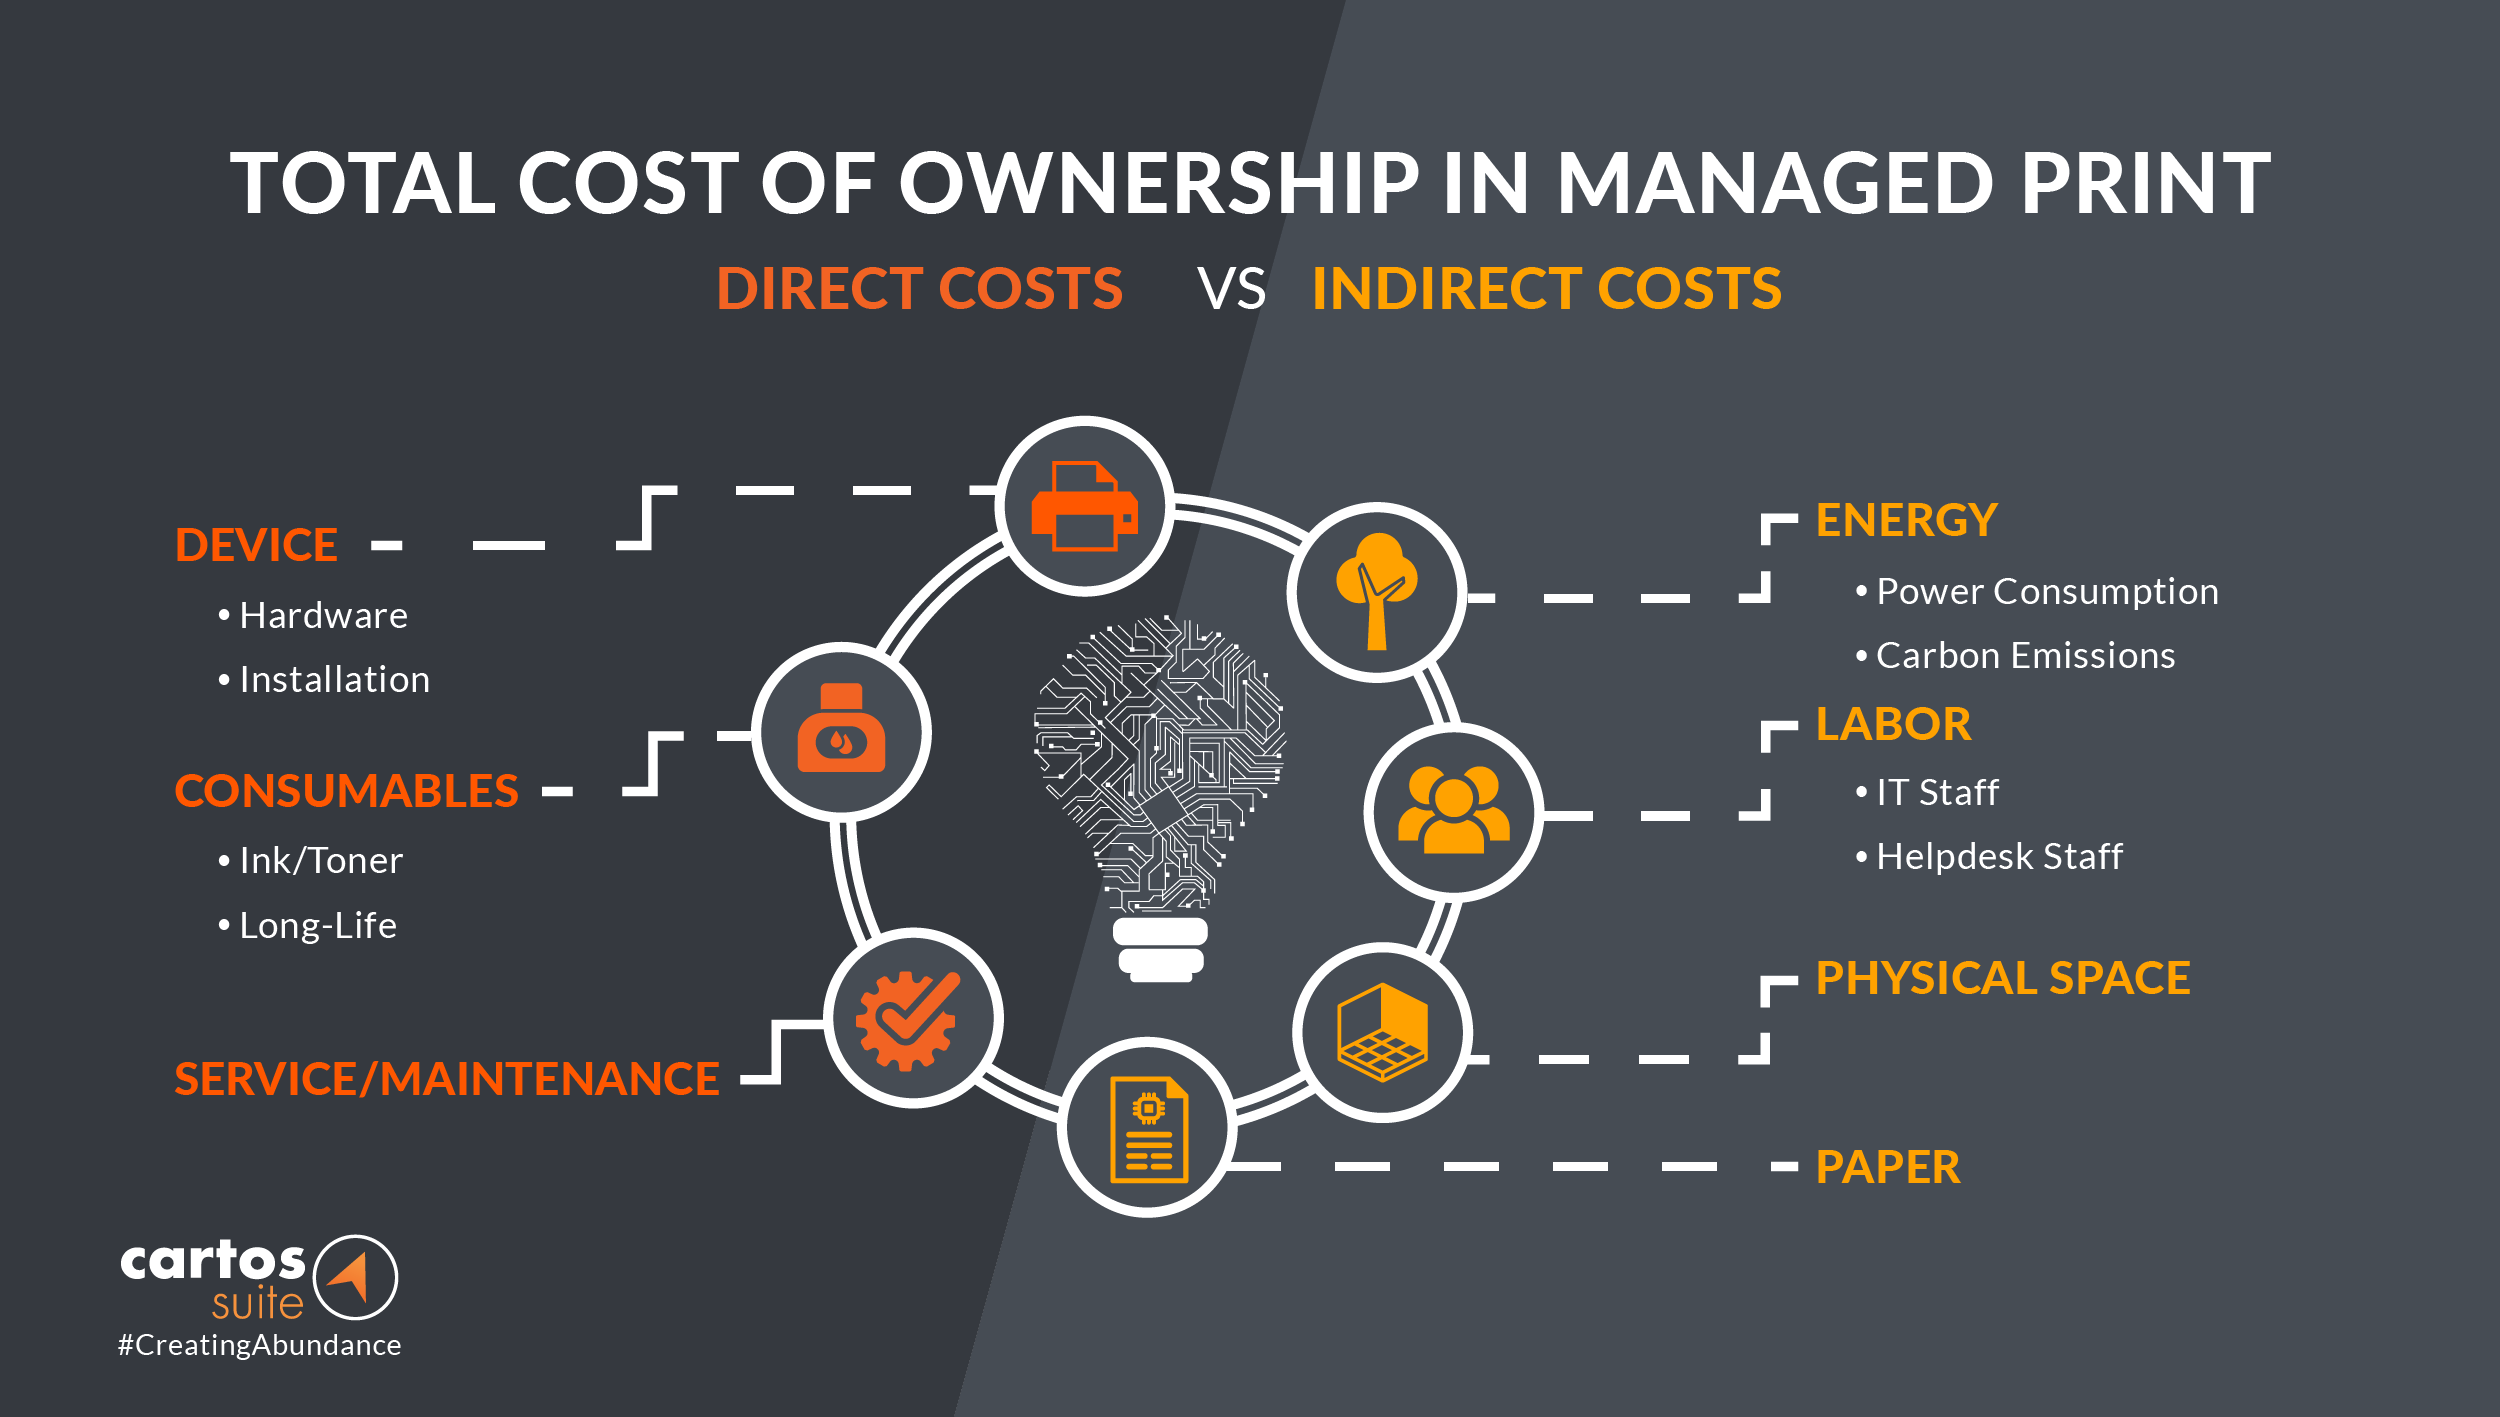 What Makes Good Total Cost of Ownership for Managed Print Services Providers?